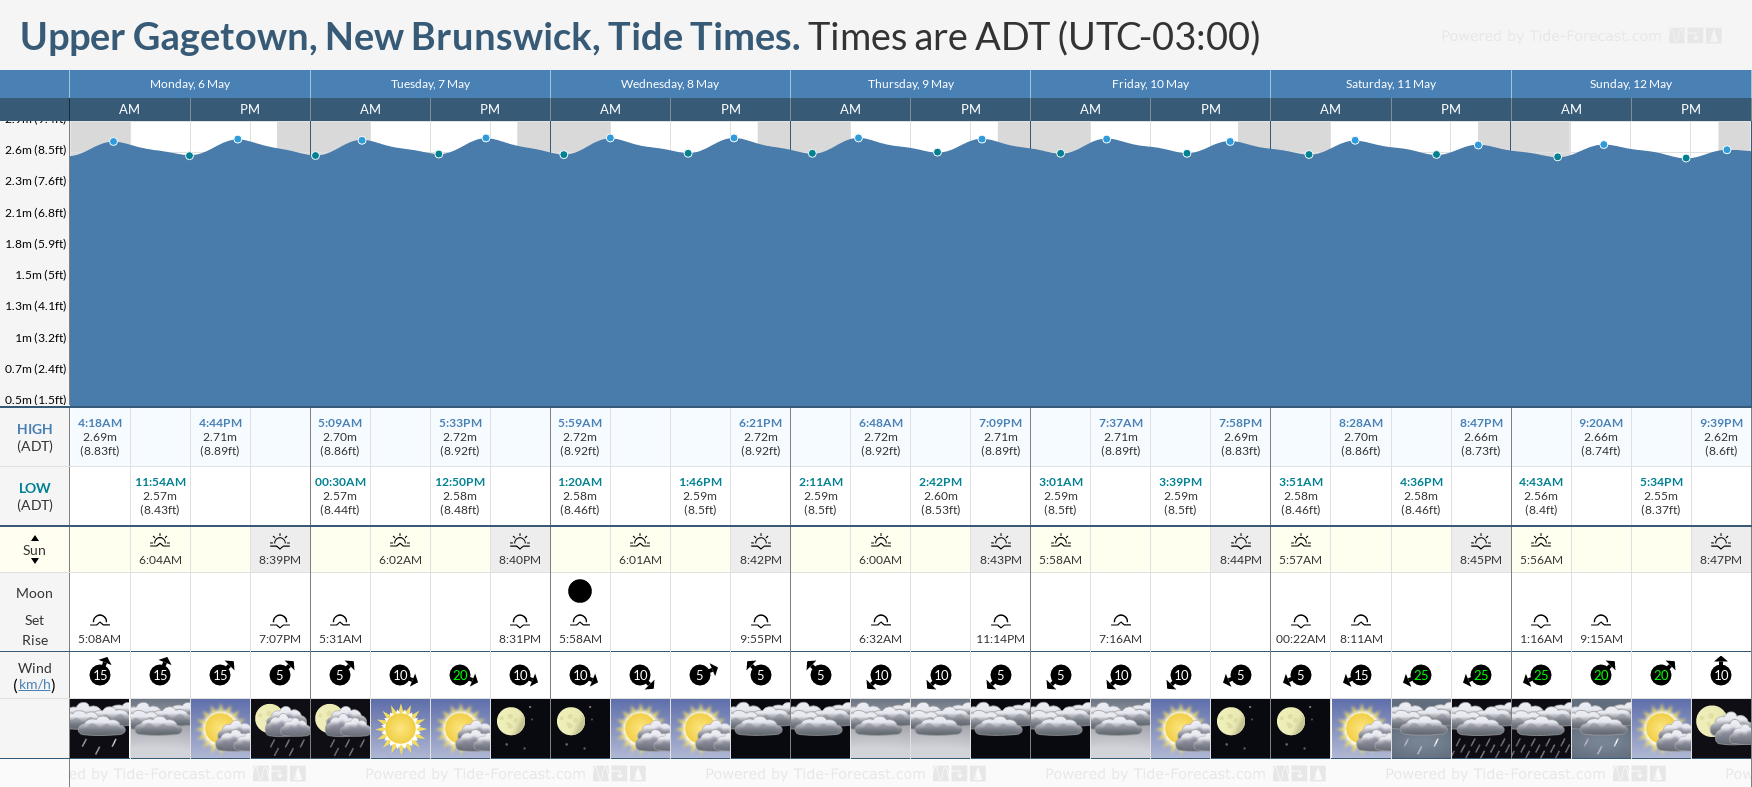 Upper Gagetown, New Brunswick Tide Chart including high and low tide tide times for the next 7 days